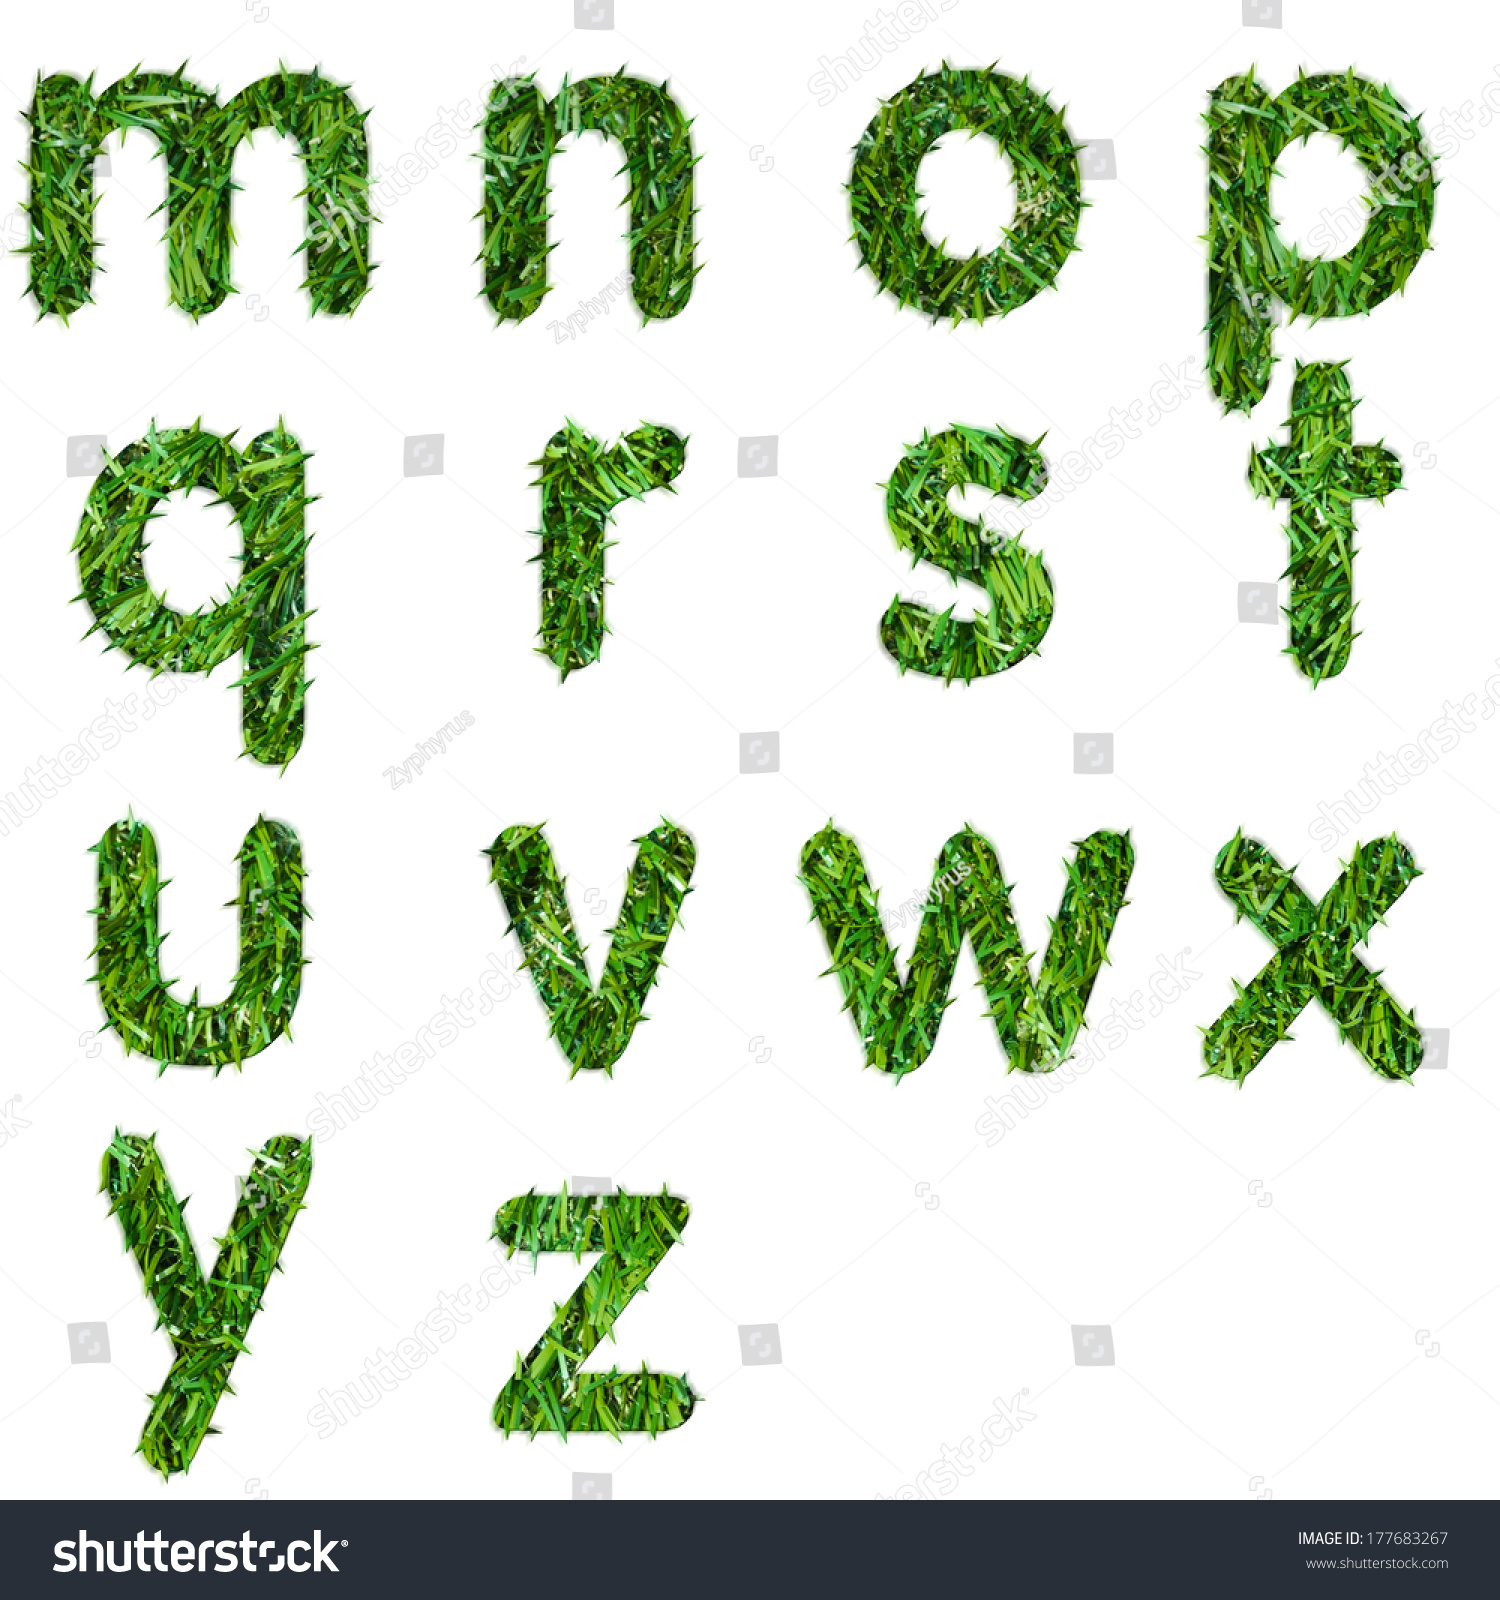 Letters Mnopqrstuvwxyz Made Green Grass Isolated Stock Photo Edit Now